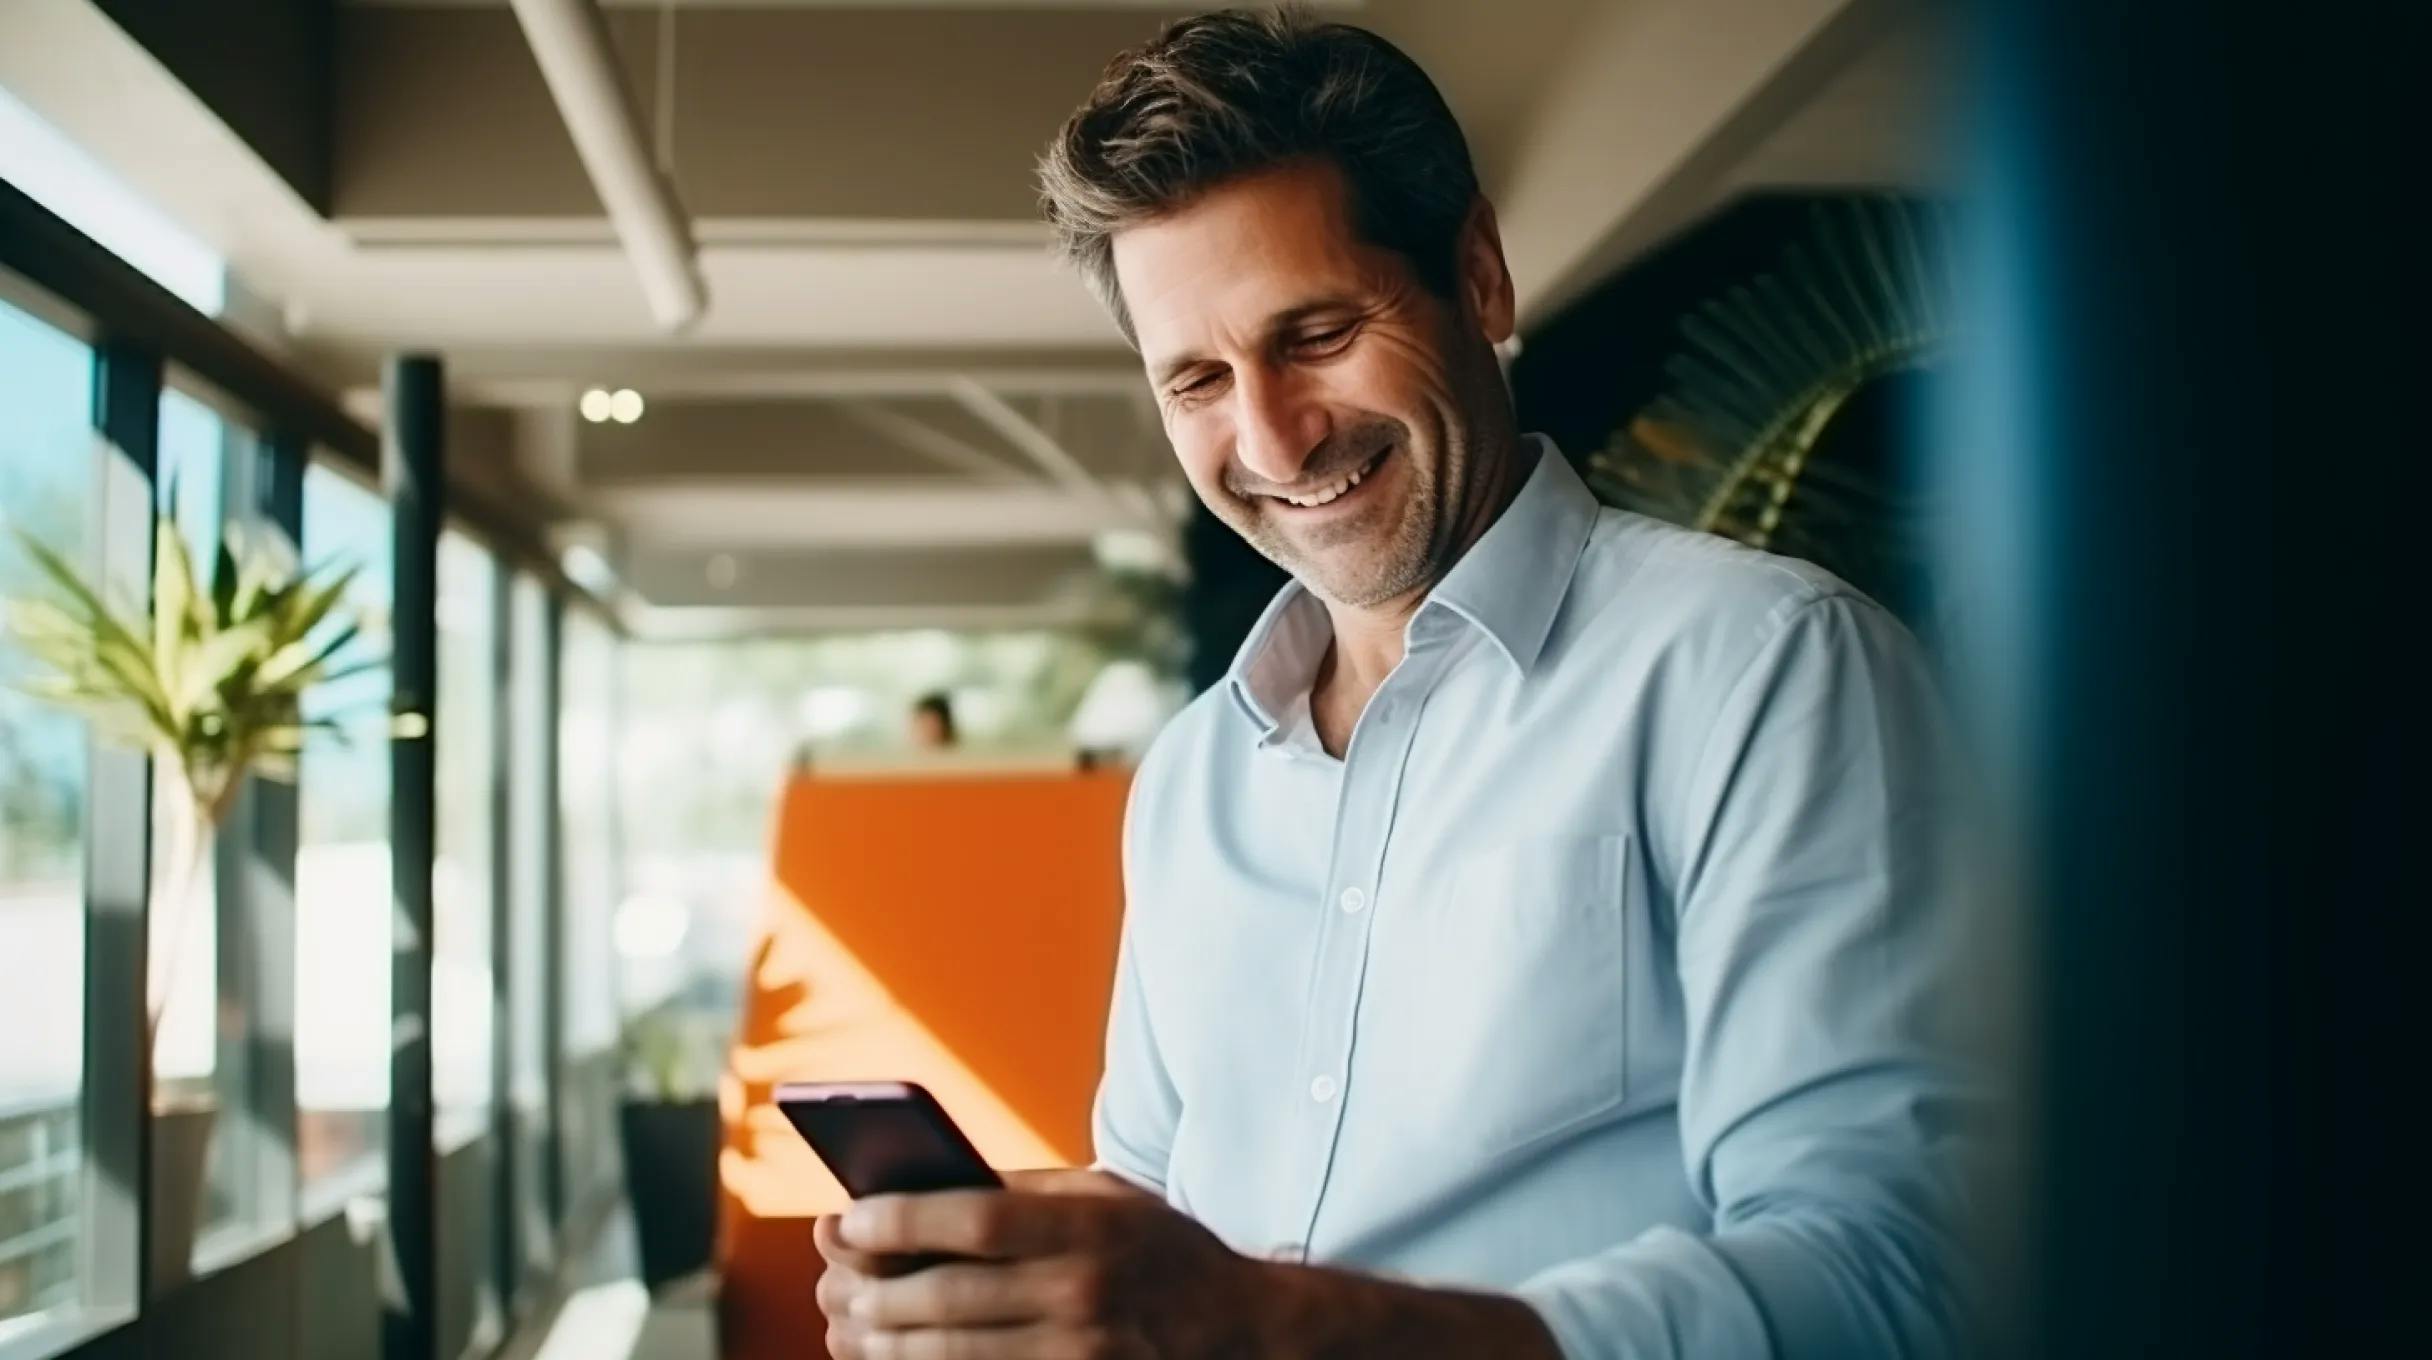 A man smiling while looking at his phone.